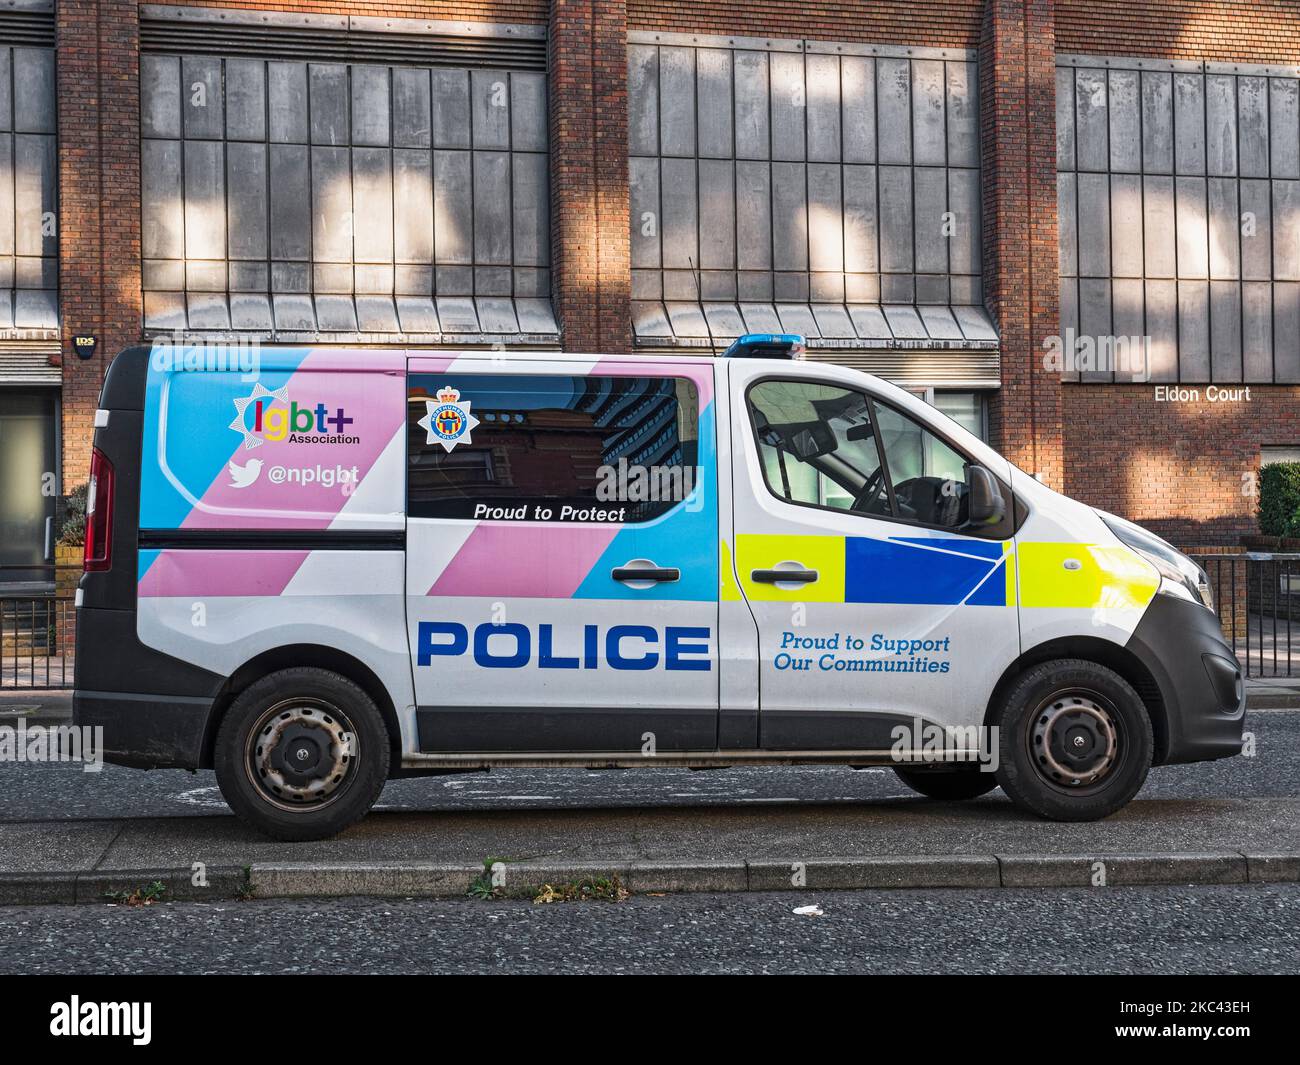 Police vehicle sporting inclusive livery in Newcastle upon Tyne, UK Stock Photo